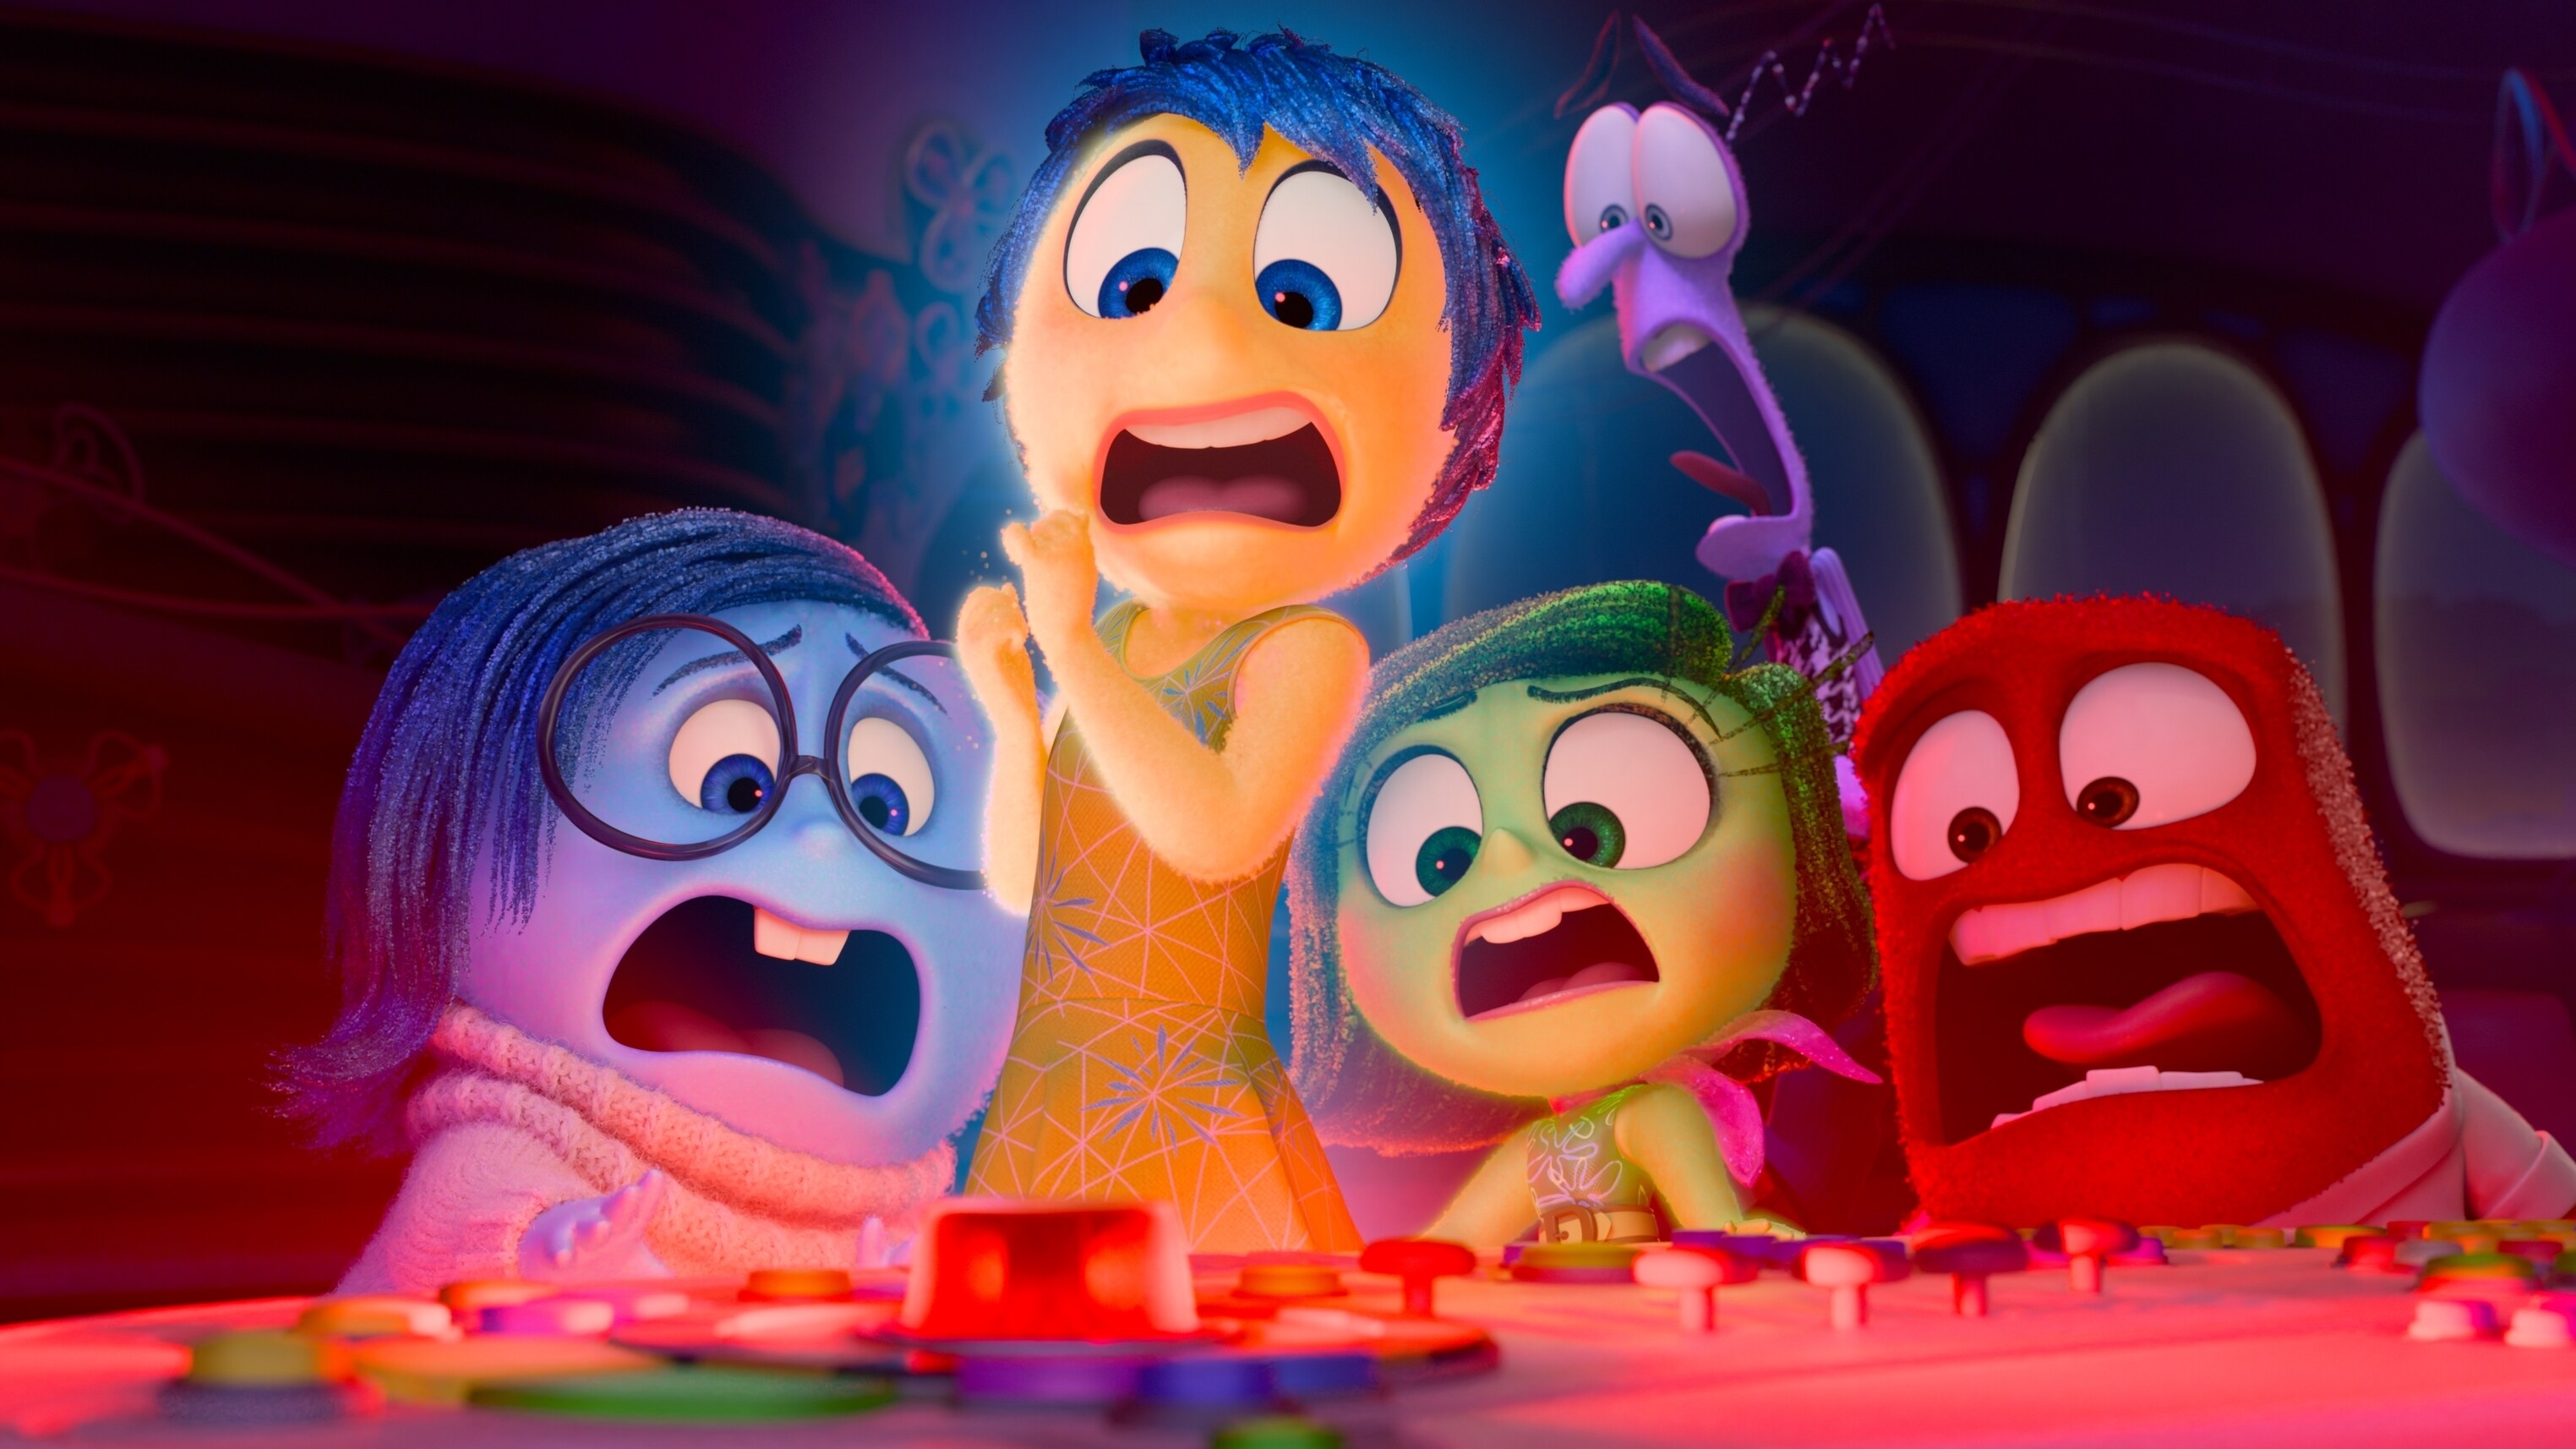 WHAT IS HAPPENING? – In Disney and Pixar’s “Inside Out 2,” Joy (voice of Amy Poehler), Sadness (voice of Phyllis Smith), Anger (voice of Lewis Black), Fear (voice of Tony Hale) and Disgust (voice of Liza Lapira) are awakened to an alarming reality: everything is changing now that Riley is 13. Directed by Kelsey Mann and produced by Mark Nielsen, “Inside Out 2” releases only in theatres June 14 2024. © 2023 Disney/Pixar. All Rights Reserved.